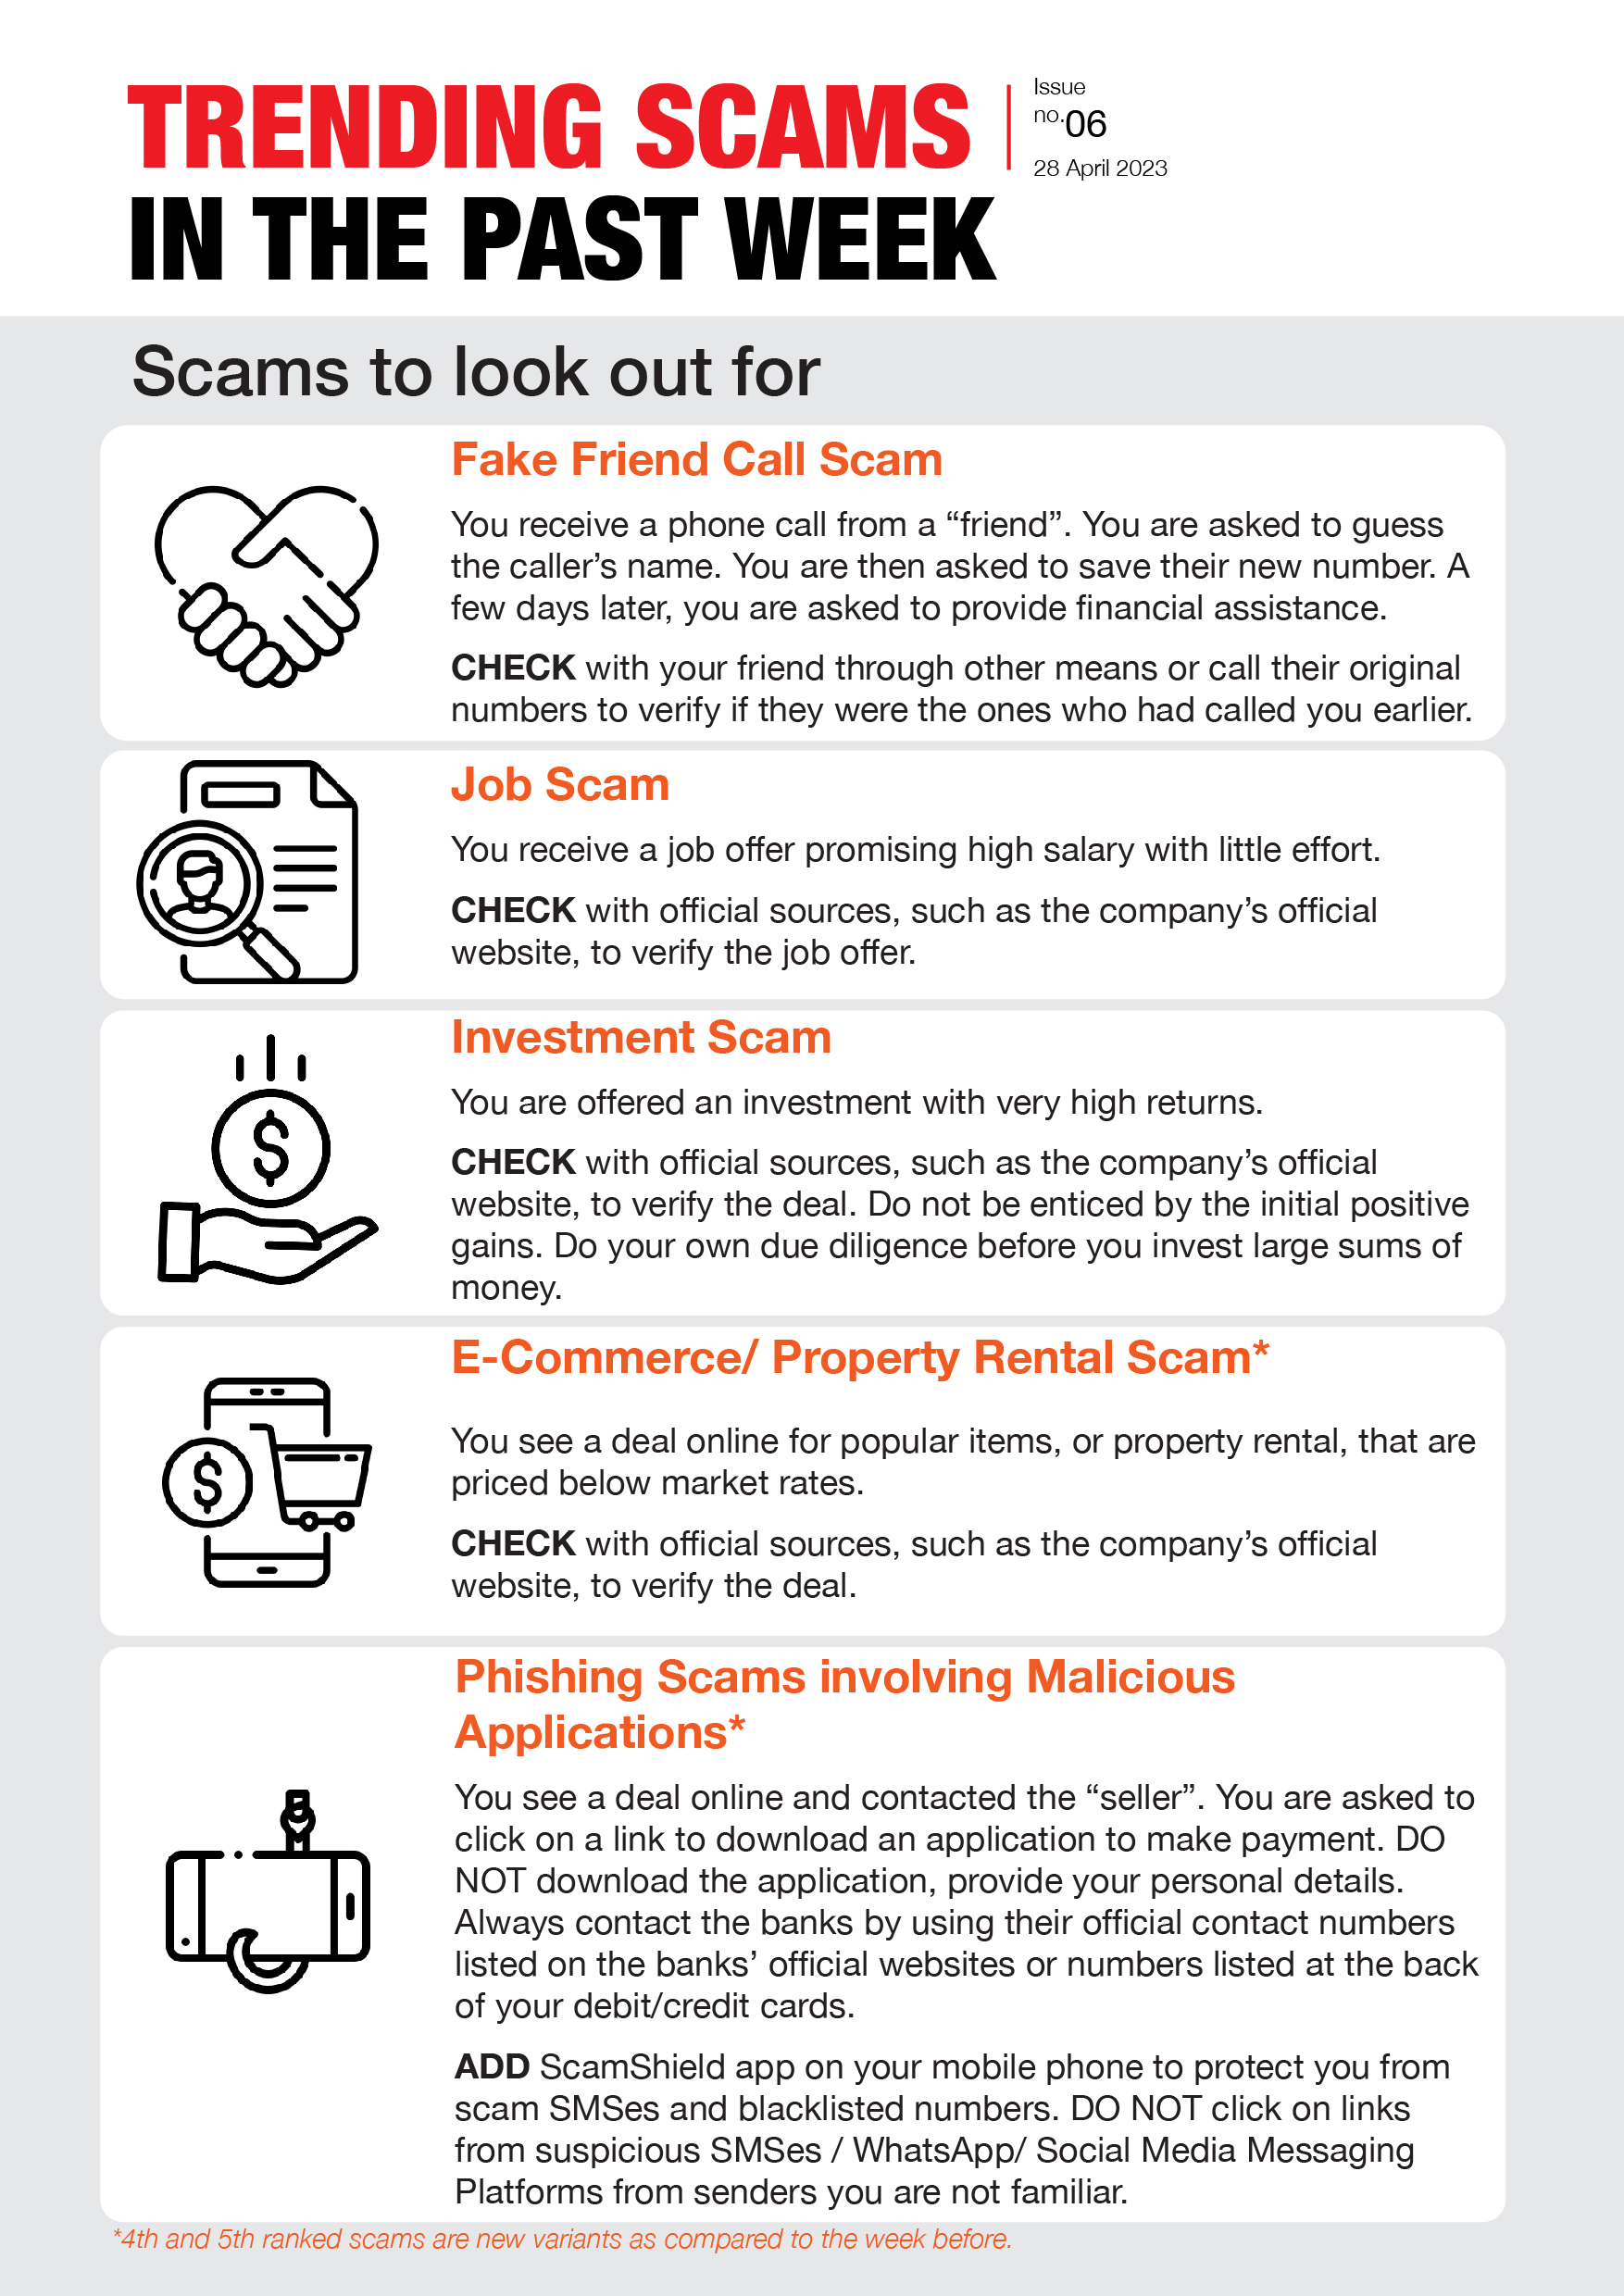 Weekly Bulletin Issue 6 - Scams to look out for